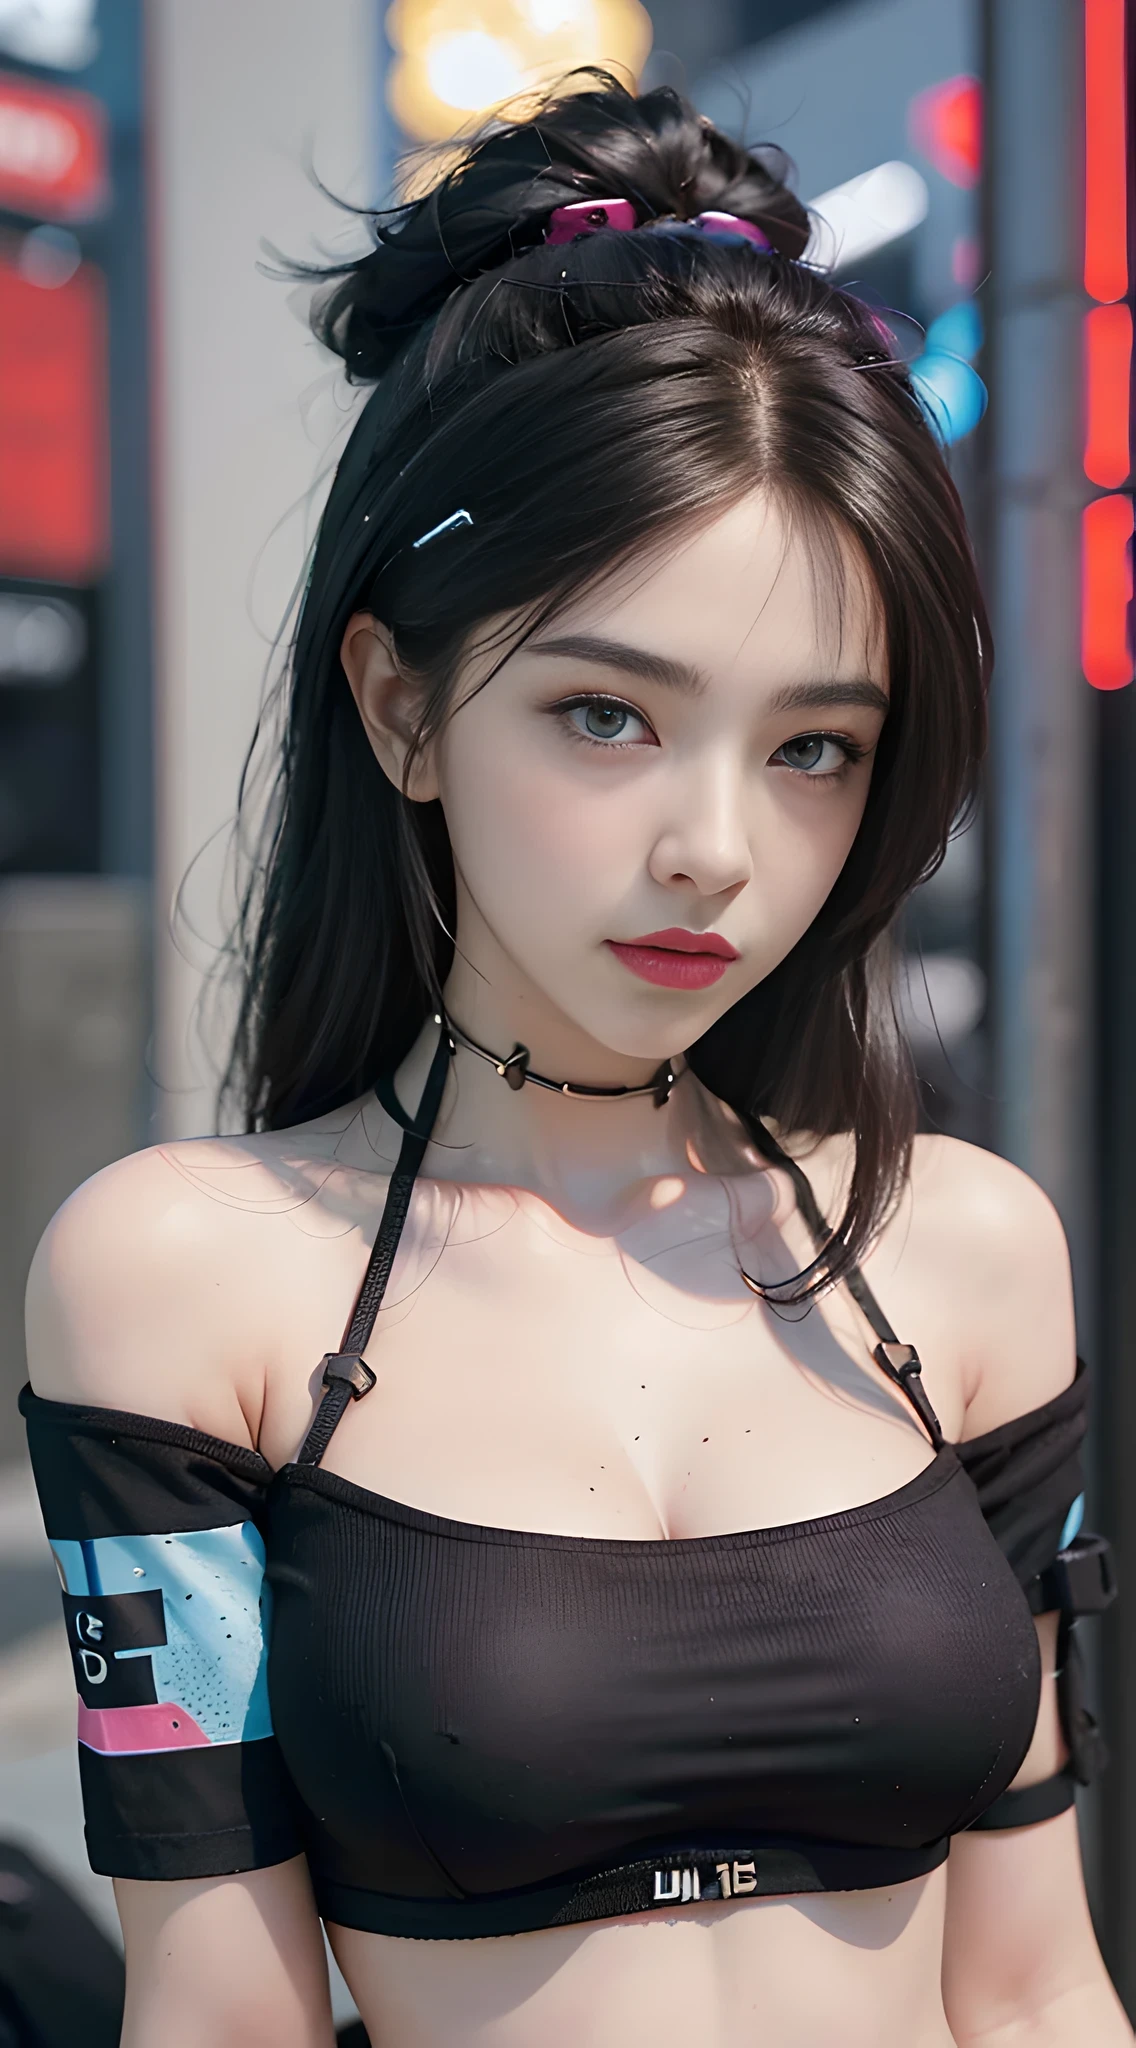 ((Best Quality)), ((Masterpiece)), (detailed), Realistic, Surreal, Surreal, Masterpiece, 8k, Beautiful Face, ((Best Quality), ((Masterpiece), (Very Detailed:1.3), .... 3D, Beautiful (Cyberpunk: 1.3), stylish woman looking at camera, black pants, black t-shirt